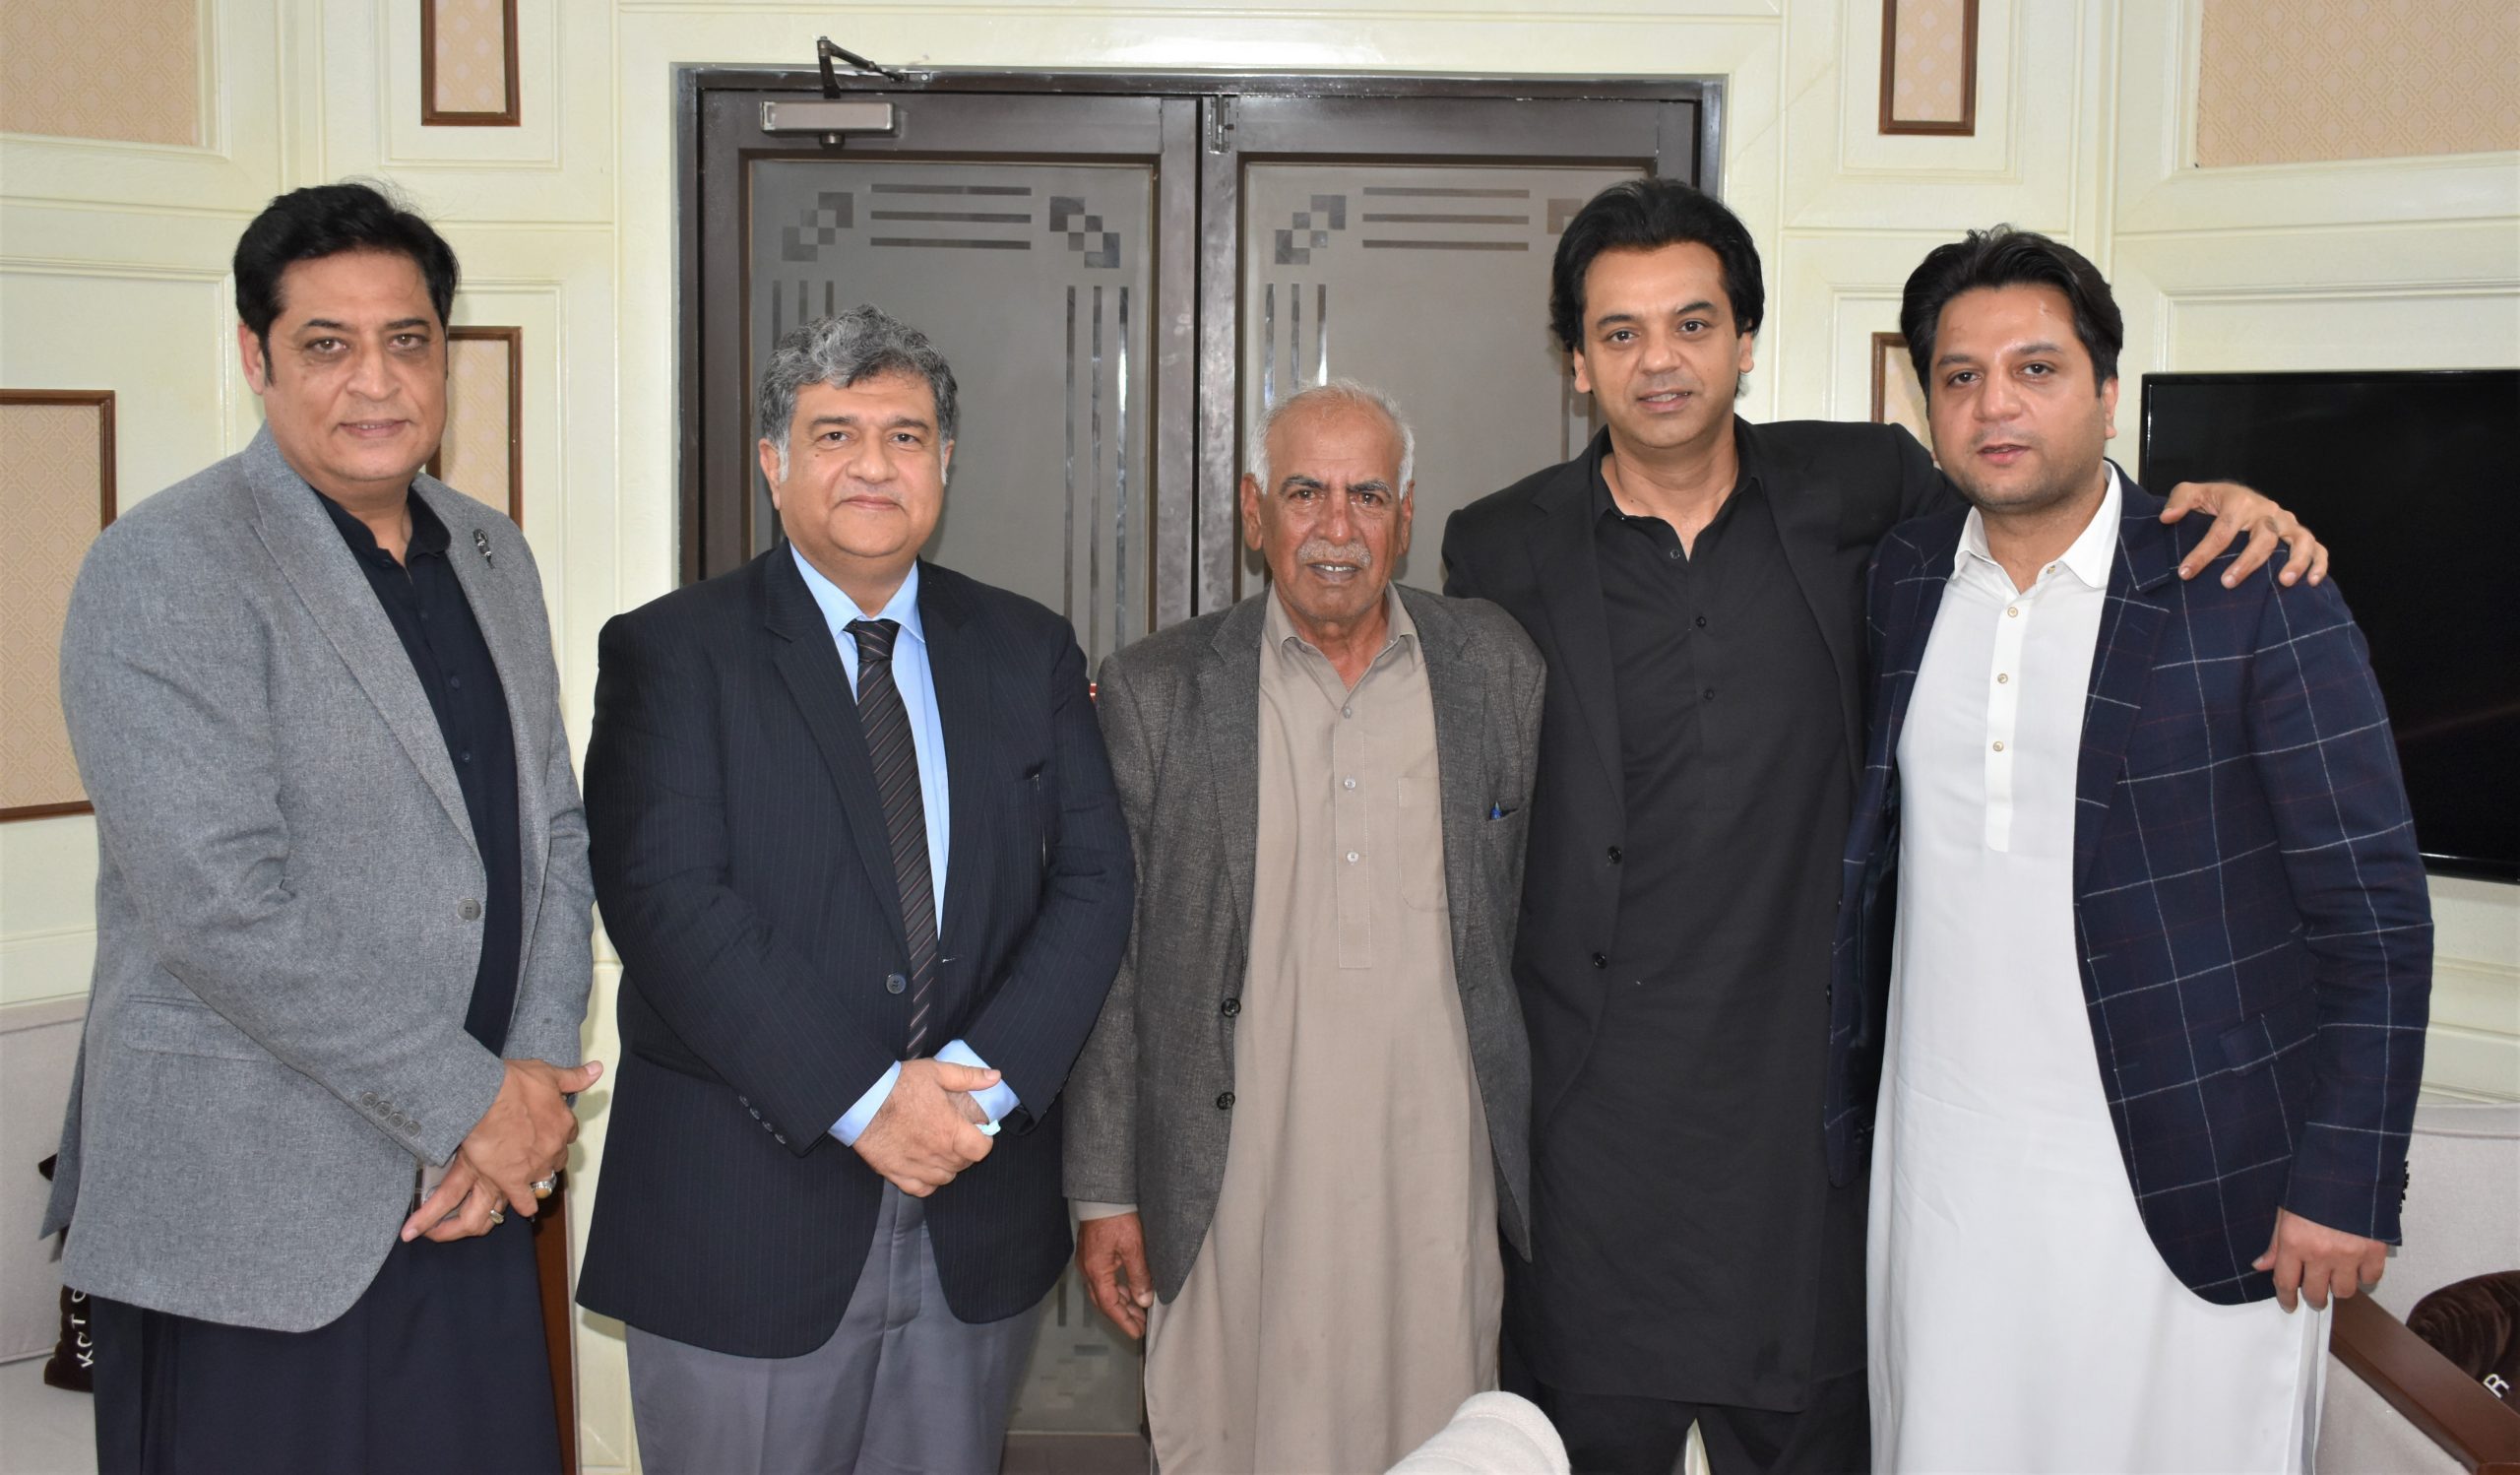 On March 04, 2022, Mr. Usman Dar, Special Advisor to PM on Youth Affairs visited Sialkot Chamber of Commerce & Industry for a meeting with Mian Imran Akbar President Sialkot Chamber. Wherein, matters related to Sialkot Export Processing Zone, Sialkot Industrial Zone, Punjab Safe City Authority Project and PICIIP were discussed. Mr. Qasim Malik, Vice President Sialkot Chamber, Mr. Fazal Gillani, Mr. Omer Meer and Mr. Umar Dar also attended the meeting.